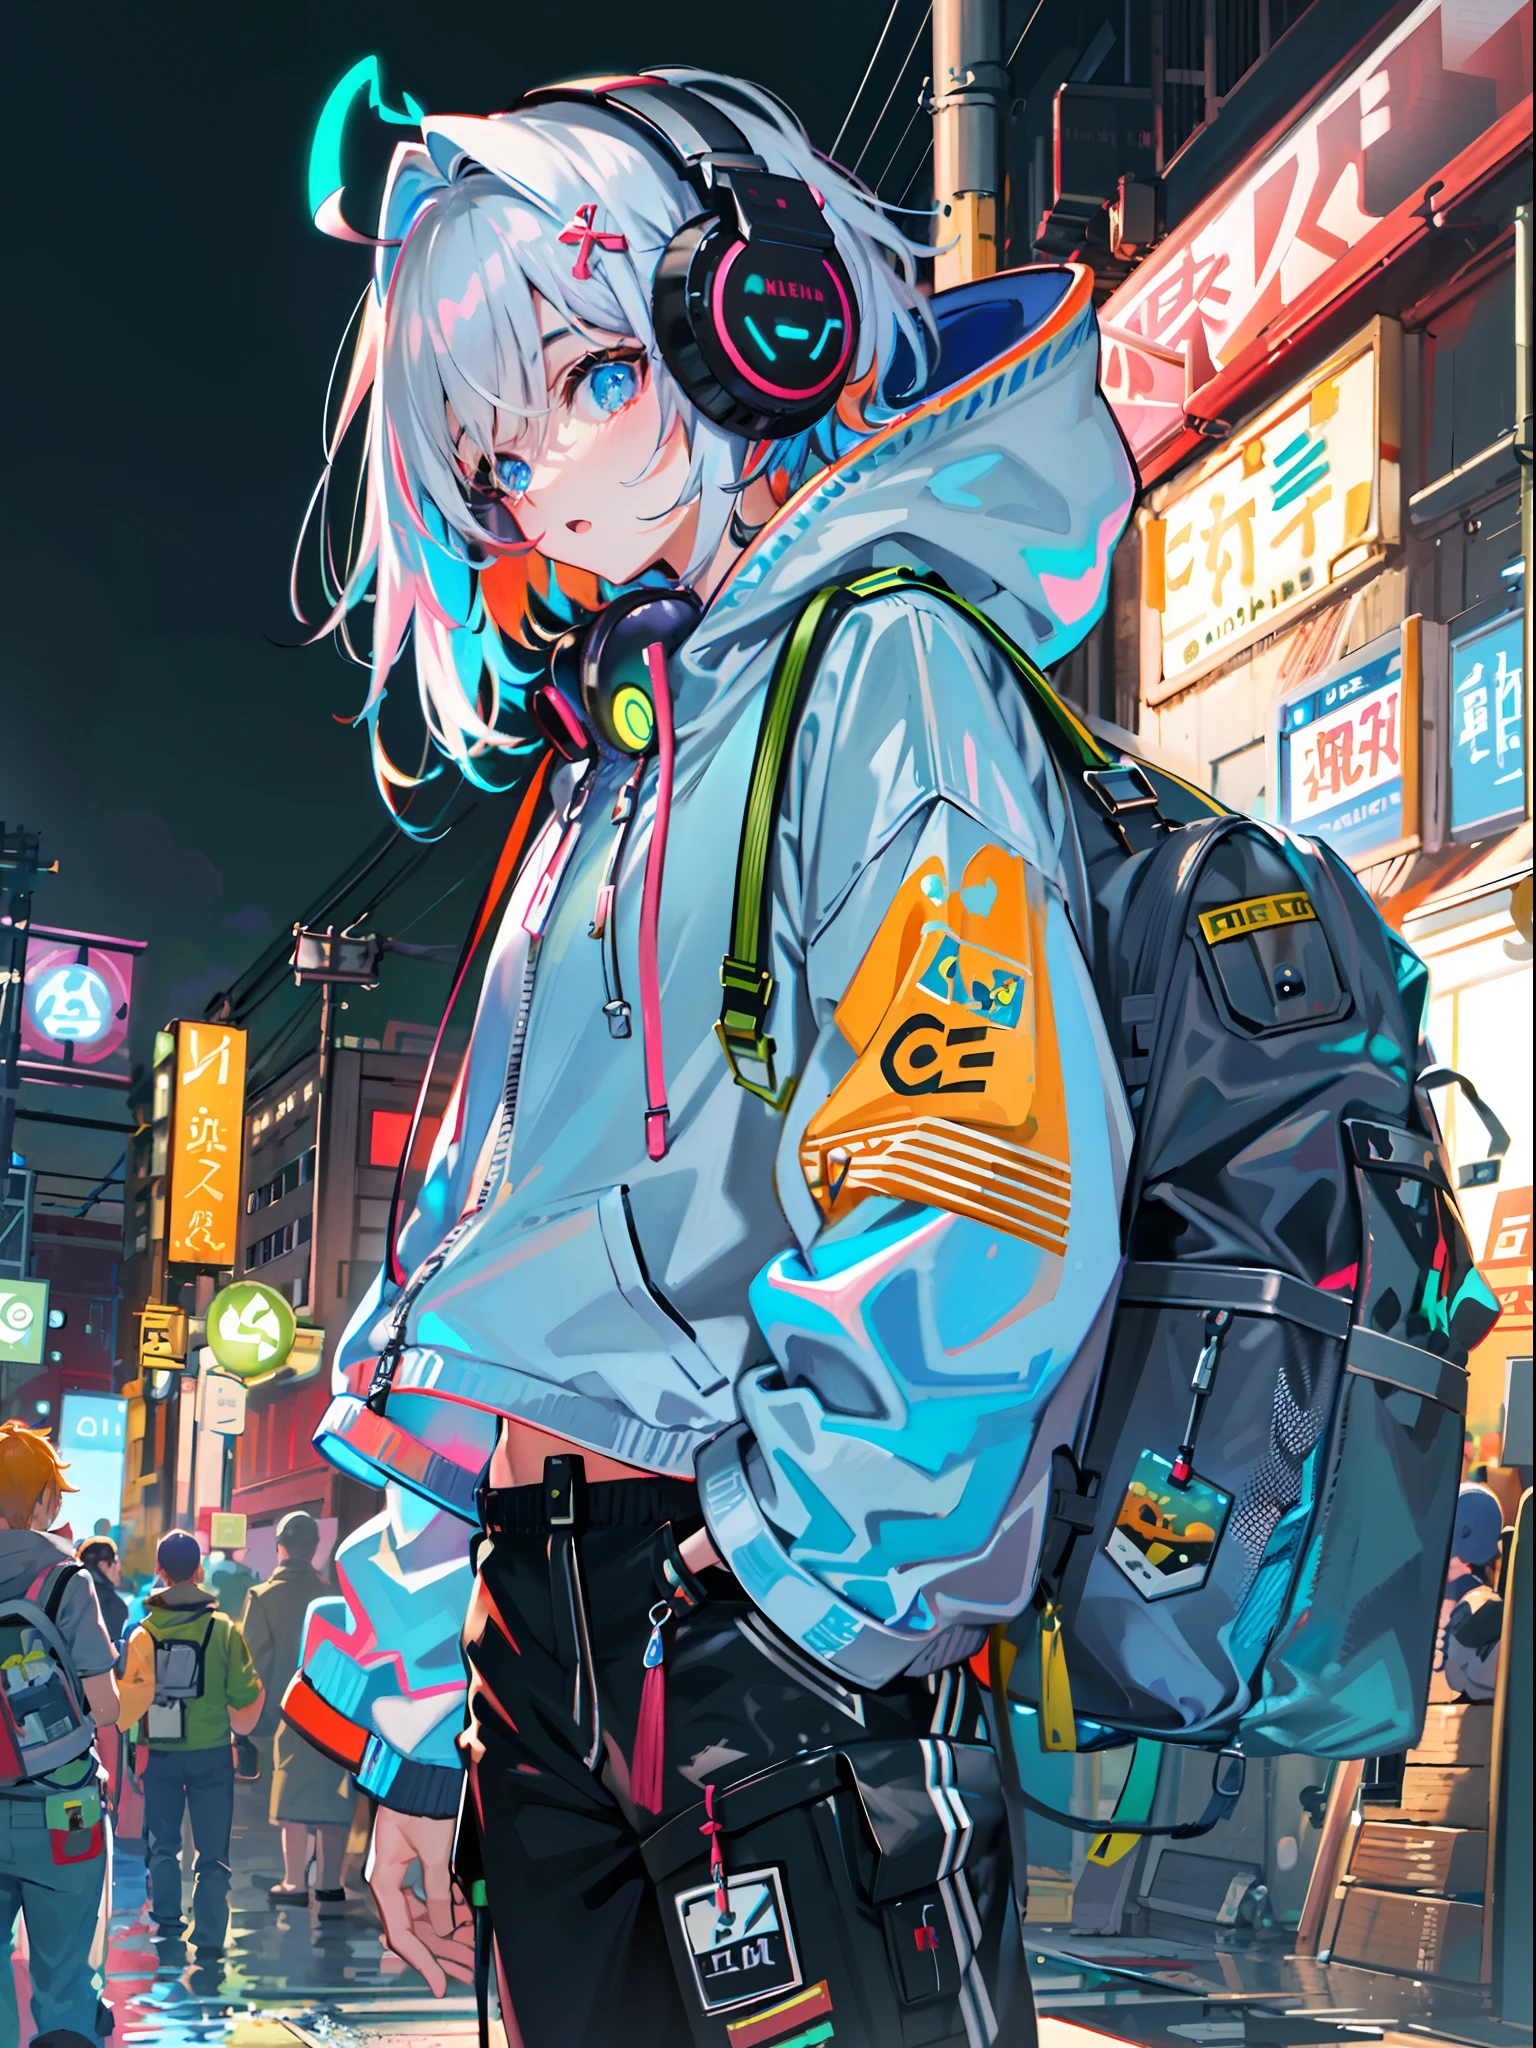 8K resolution、((top-quality))、((​masterpiece))、((Ultra-detail))、1 woman、solo、incredibly absurdness、Oversized hoodies、headphones、Street、plein air、Sateen、Neon Street、Shortcut Hair、Brightly colored eyes、Hands in pockets、shortpants、water dripping